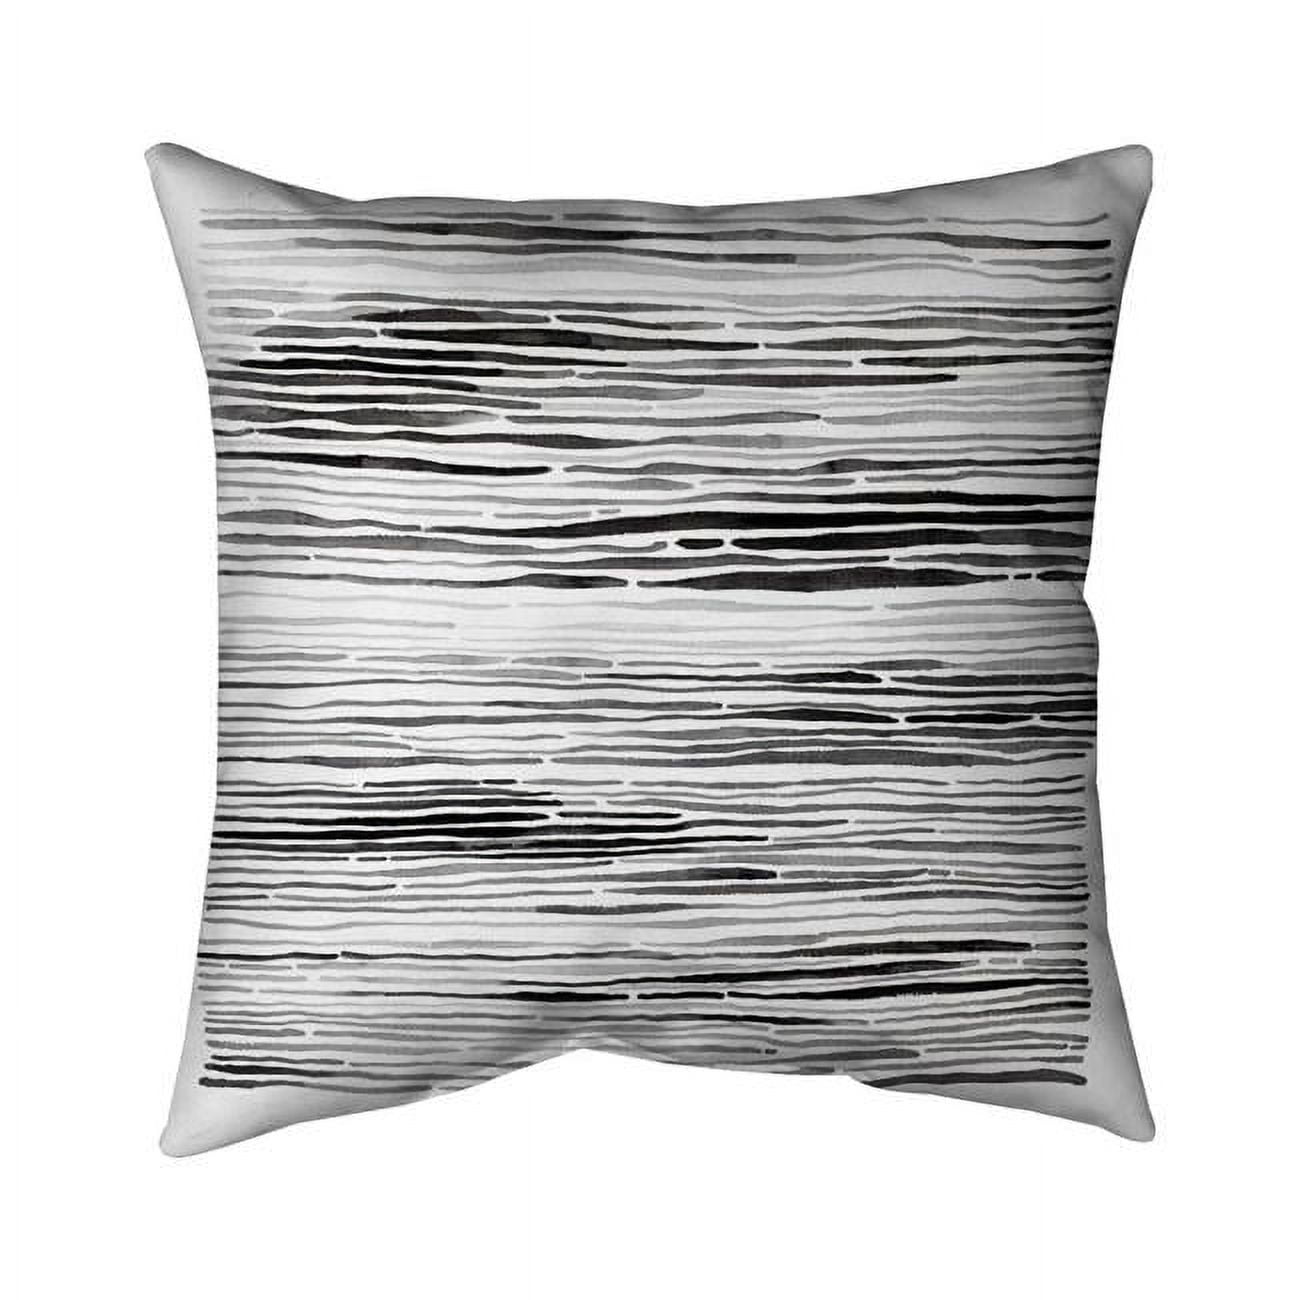 Begin Home Decor 5542-1818-AB68 18 x 18 in. Grey Grooves-Double Sided Print Outdoor Pillow Cover